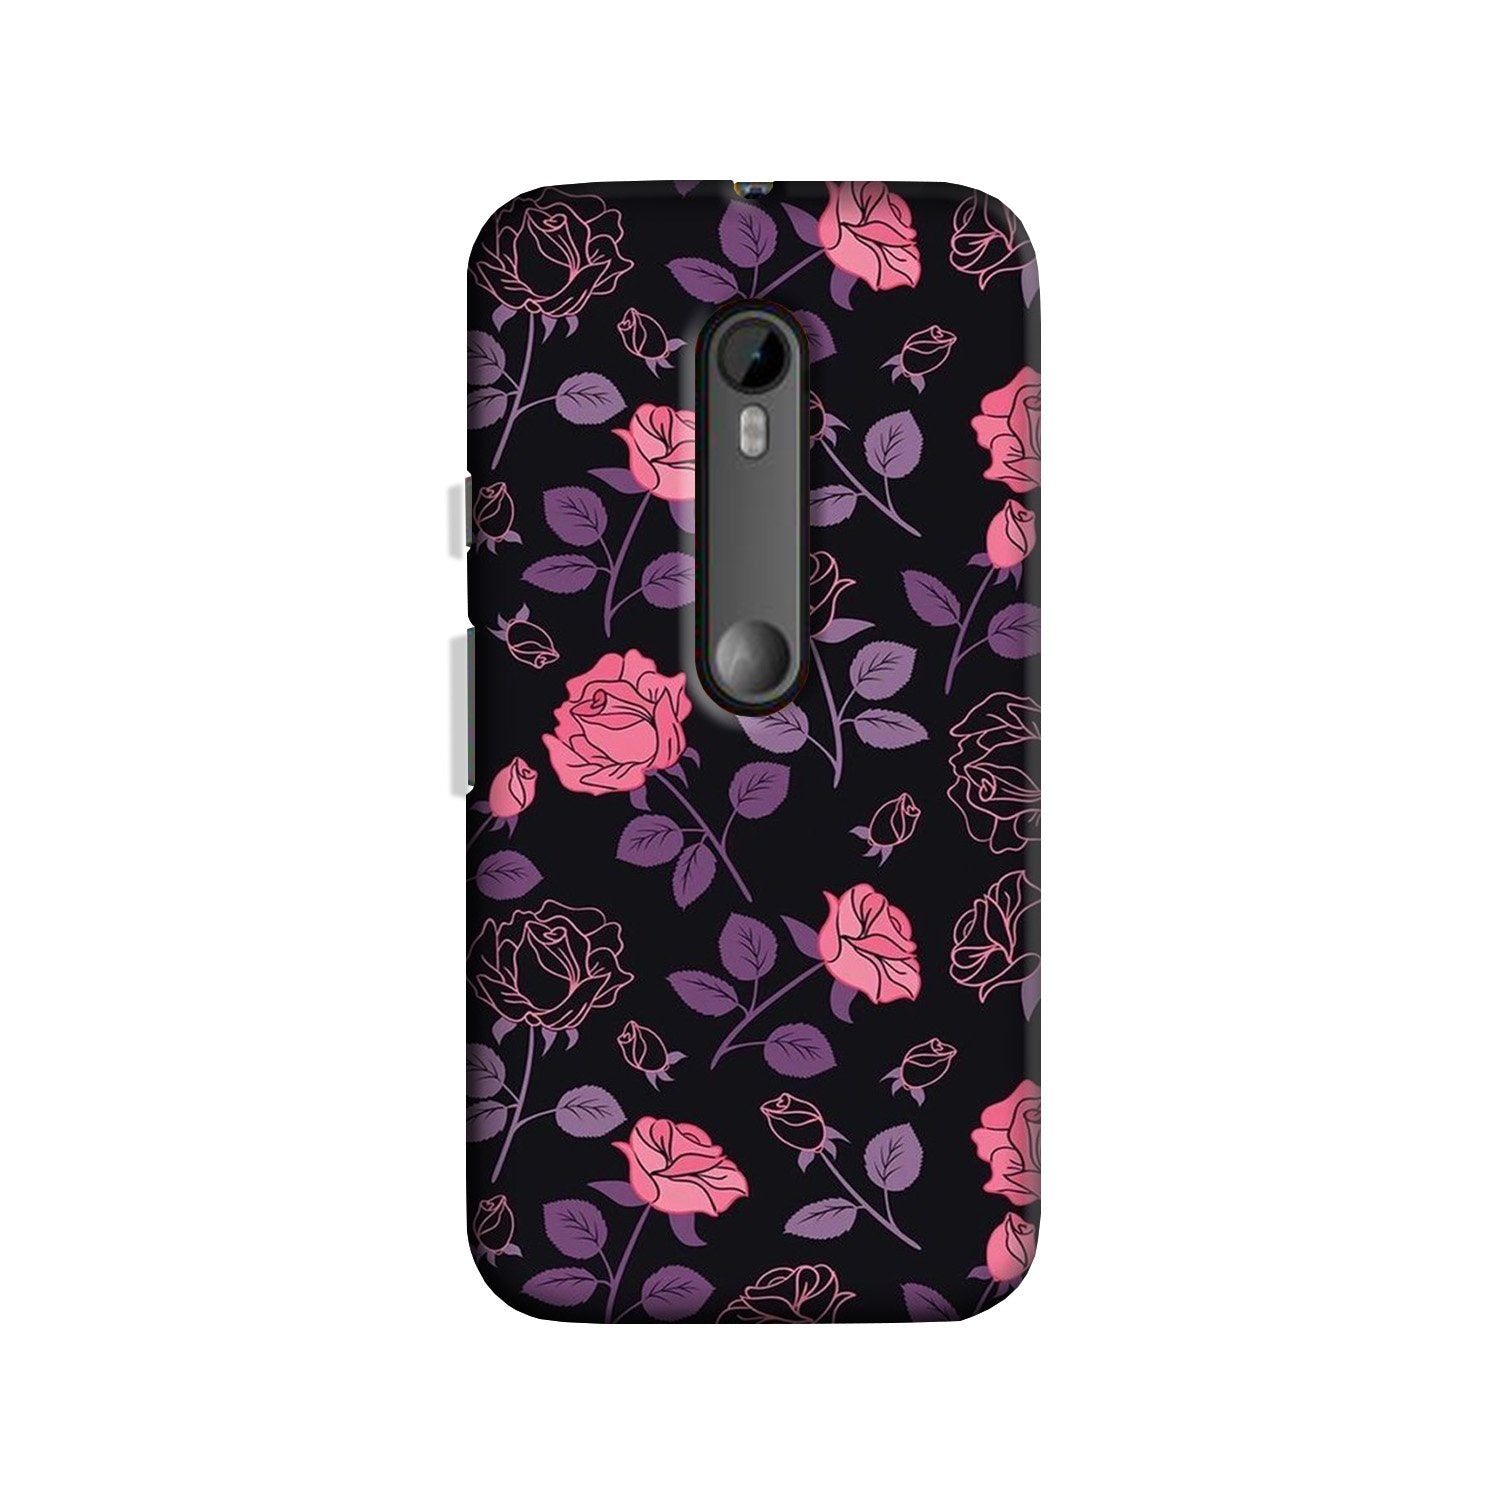 Rose Black Background Case for Moto X Play